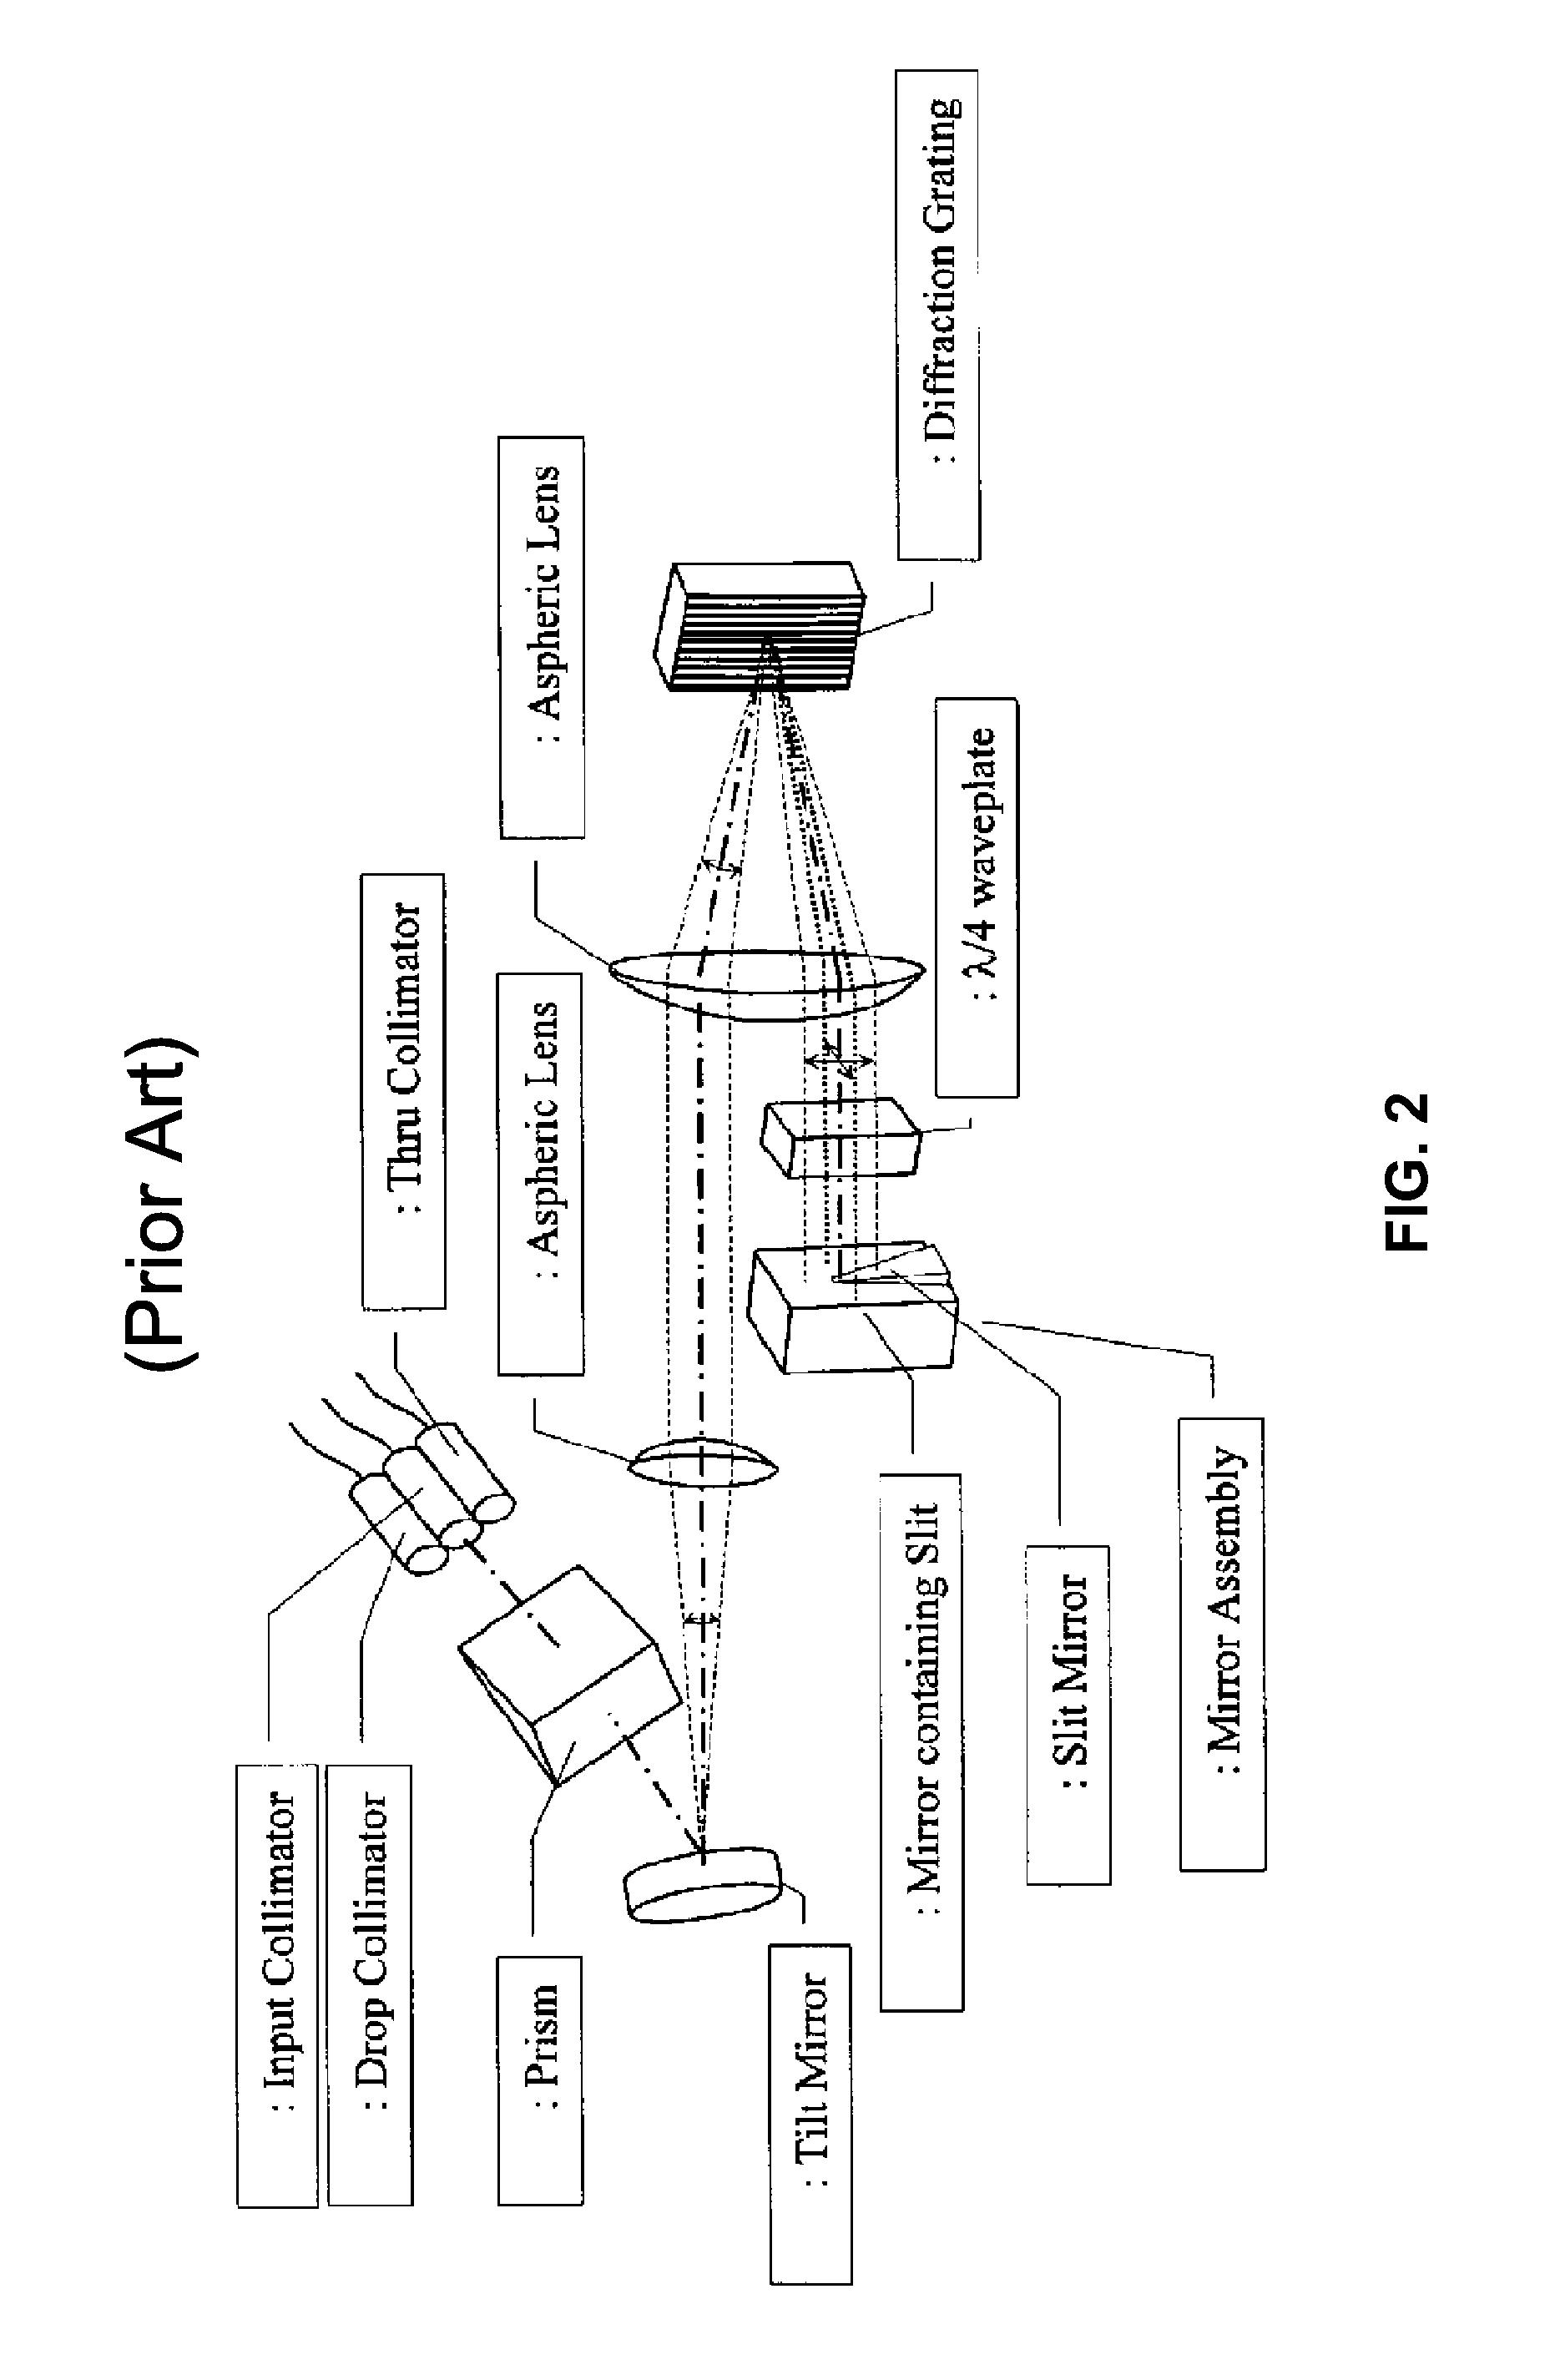 Systems and methods for reducing off-axis optical aberrations in wavelength dispersed devices